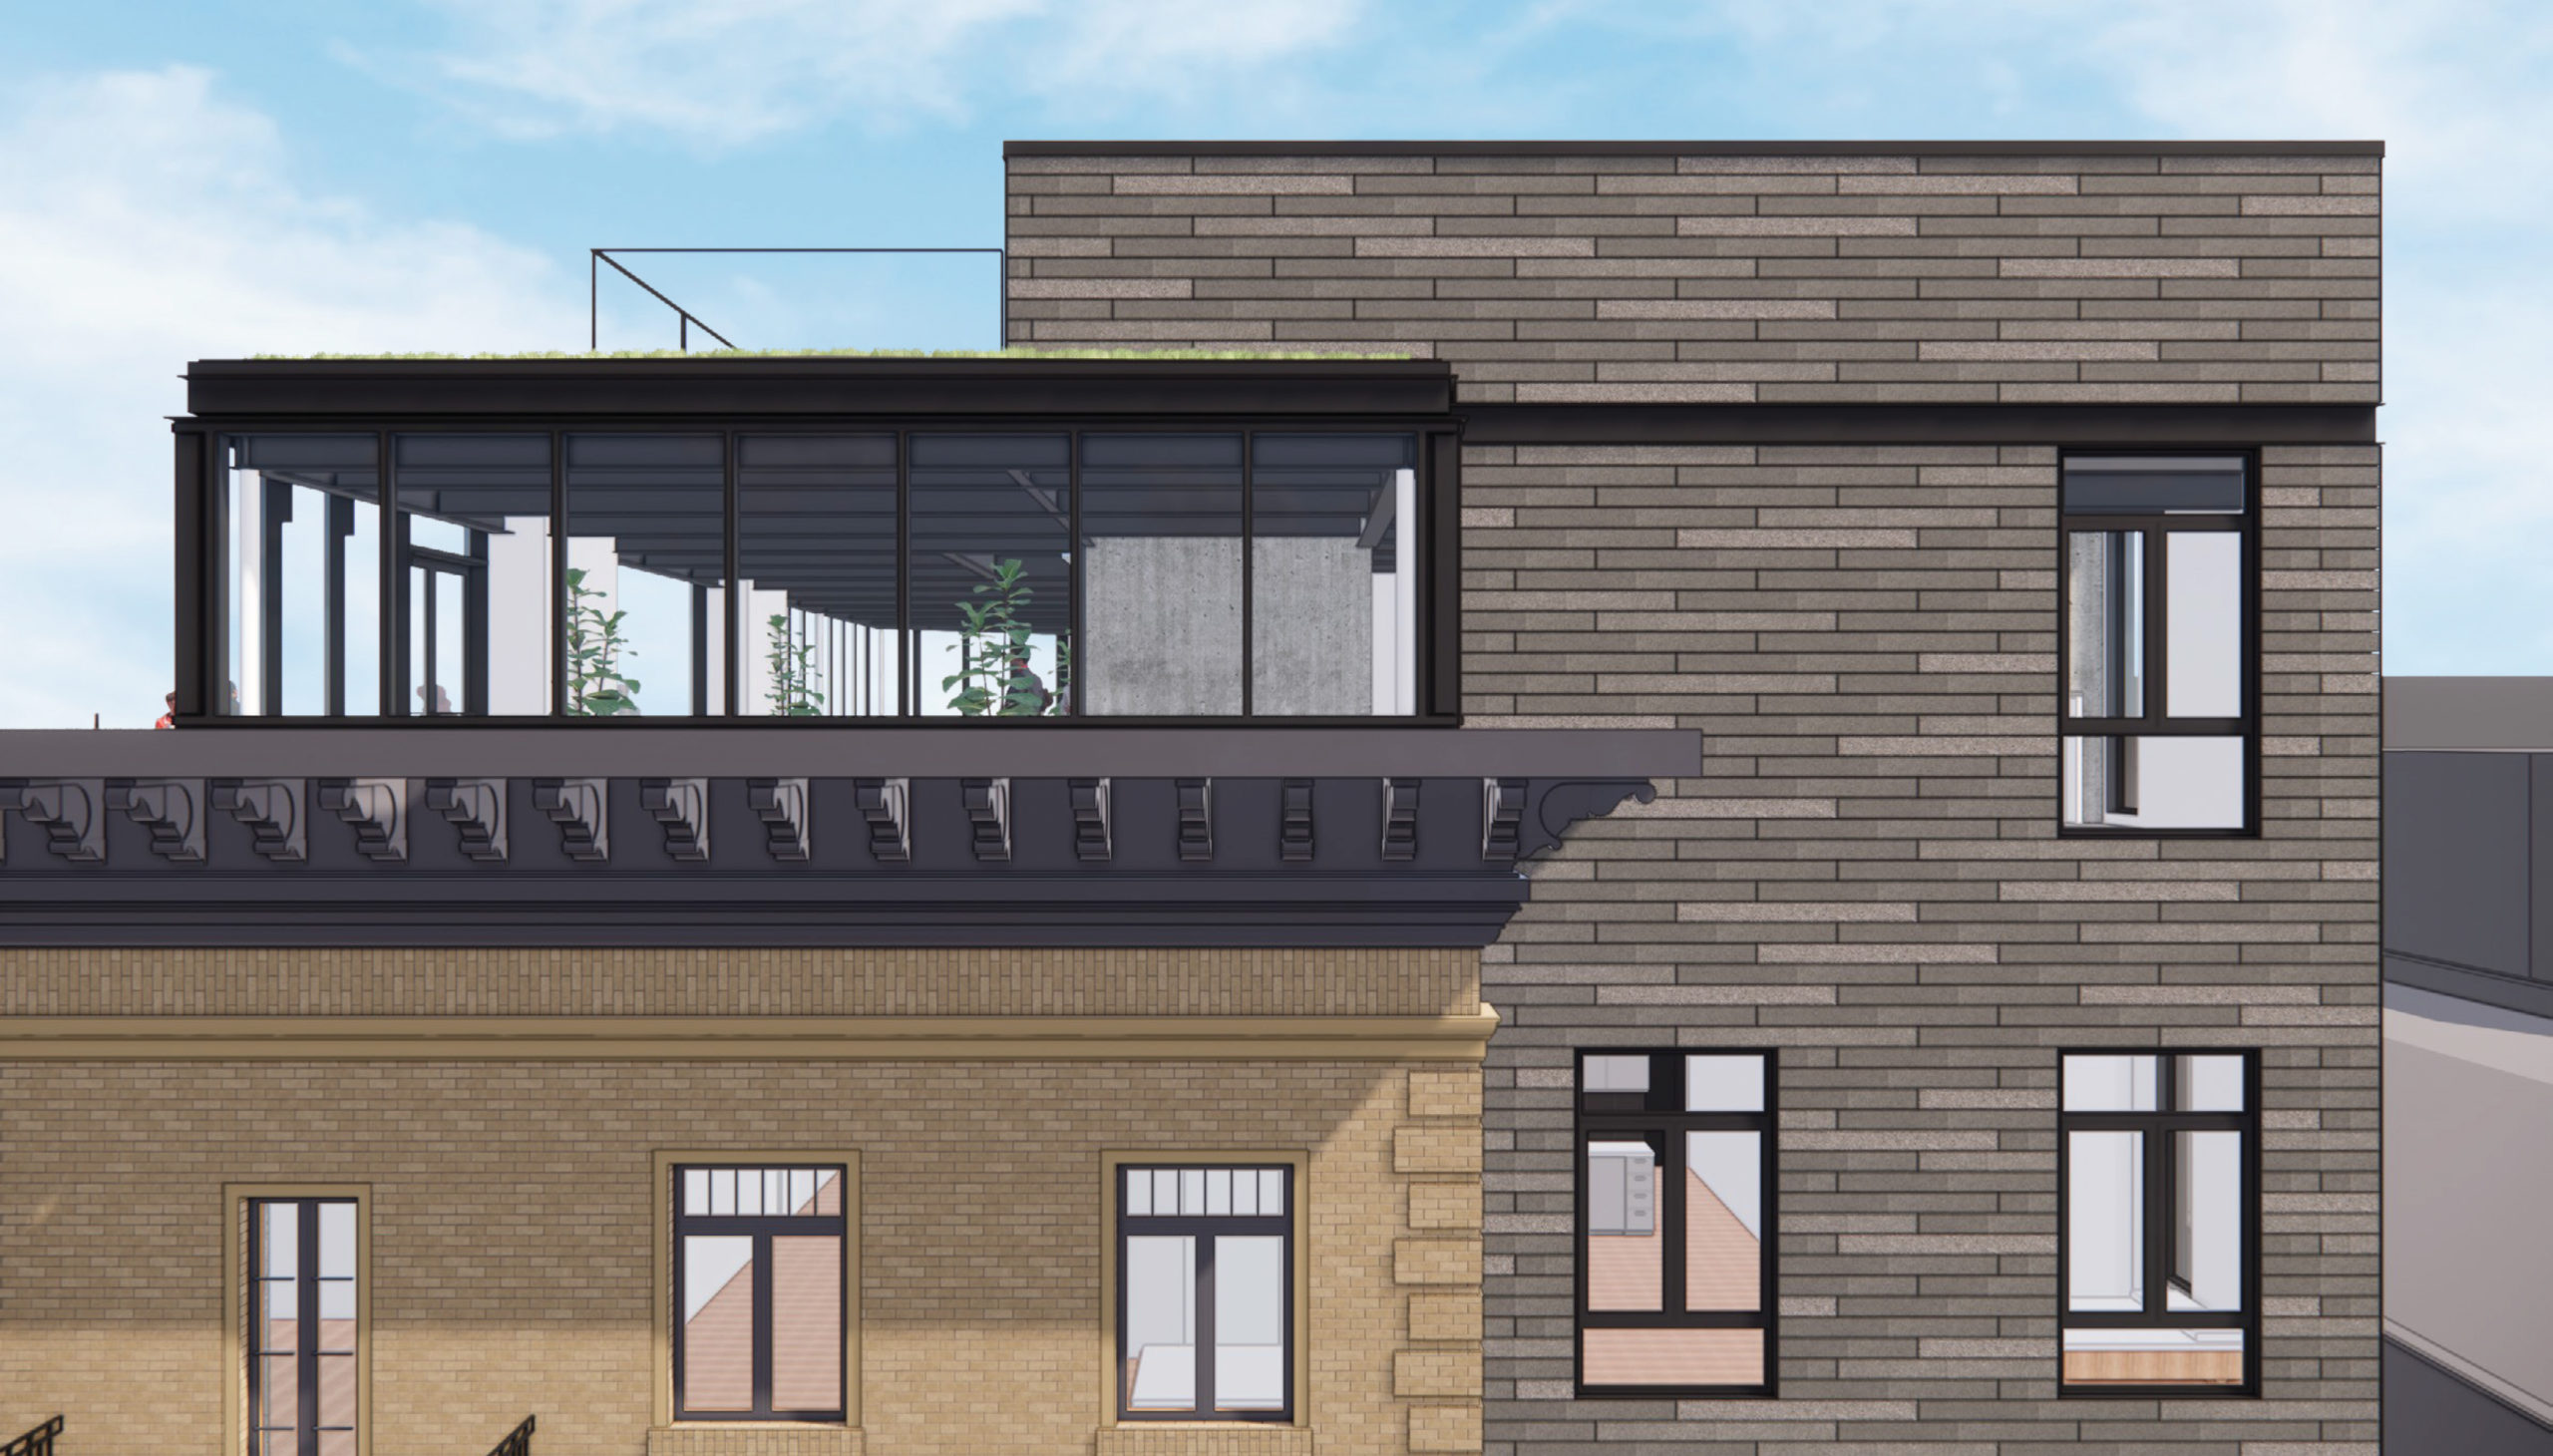 659 Union Street restaurant terrace and the historic masonry and new details, rendering by multistudio